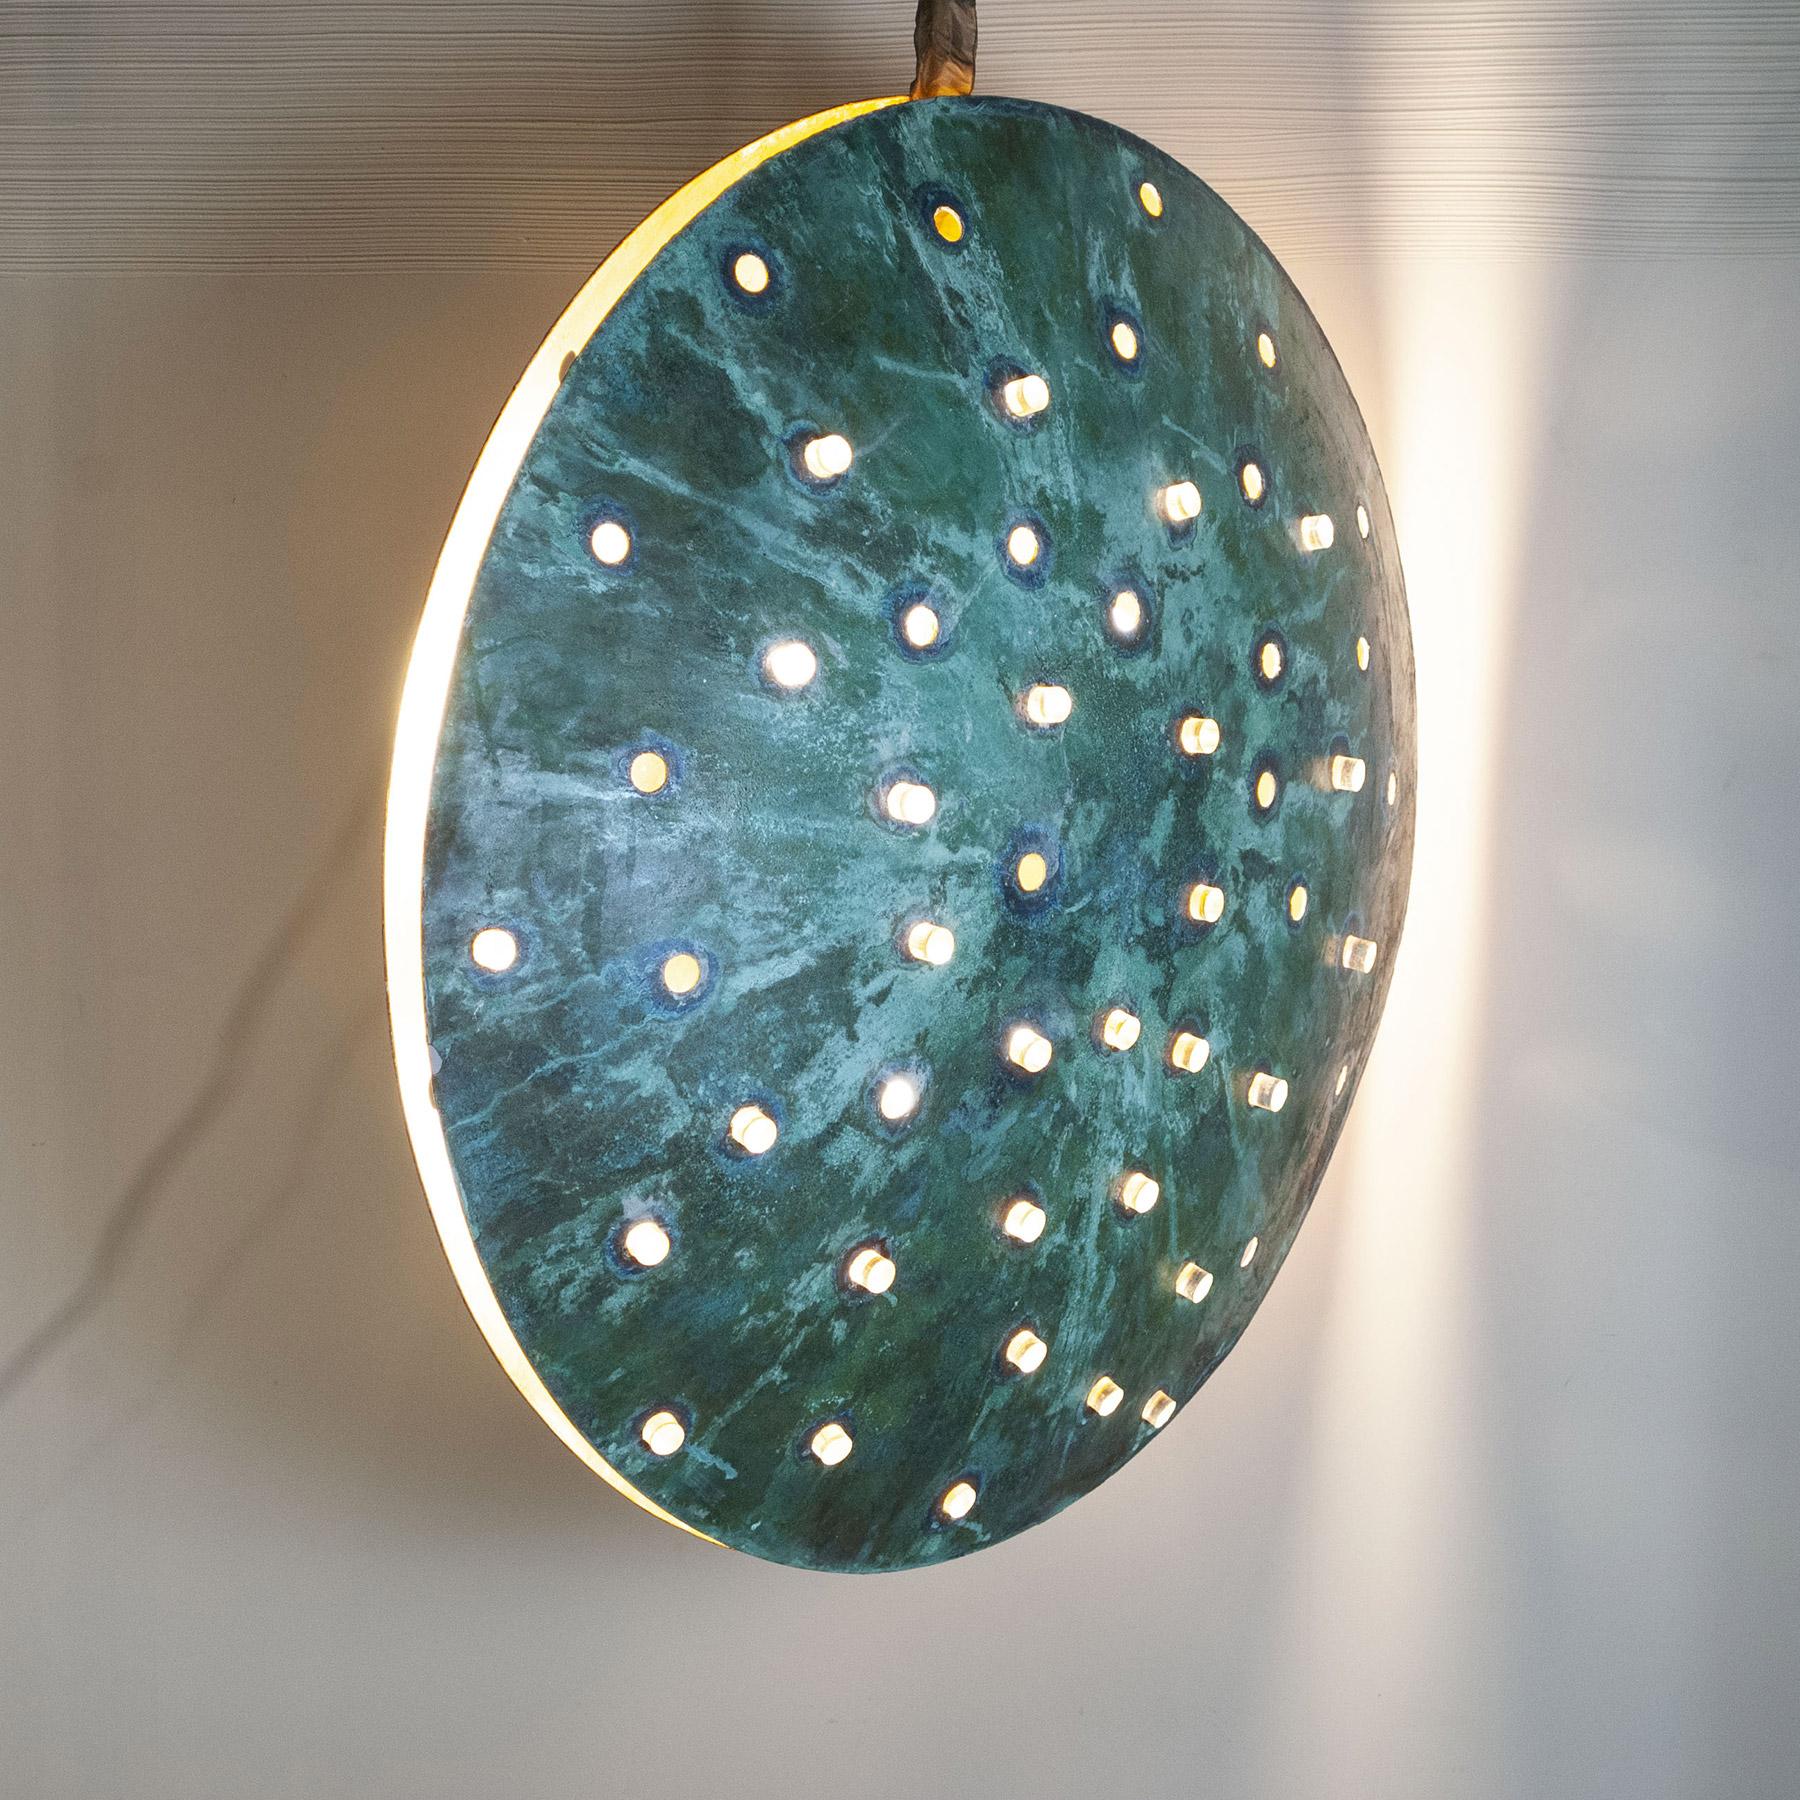 Mid-Century Modern Gong Sculptural Chandelier by Cellule Creative Studio For Sale